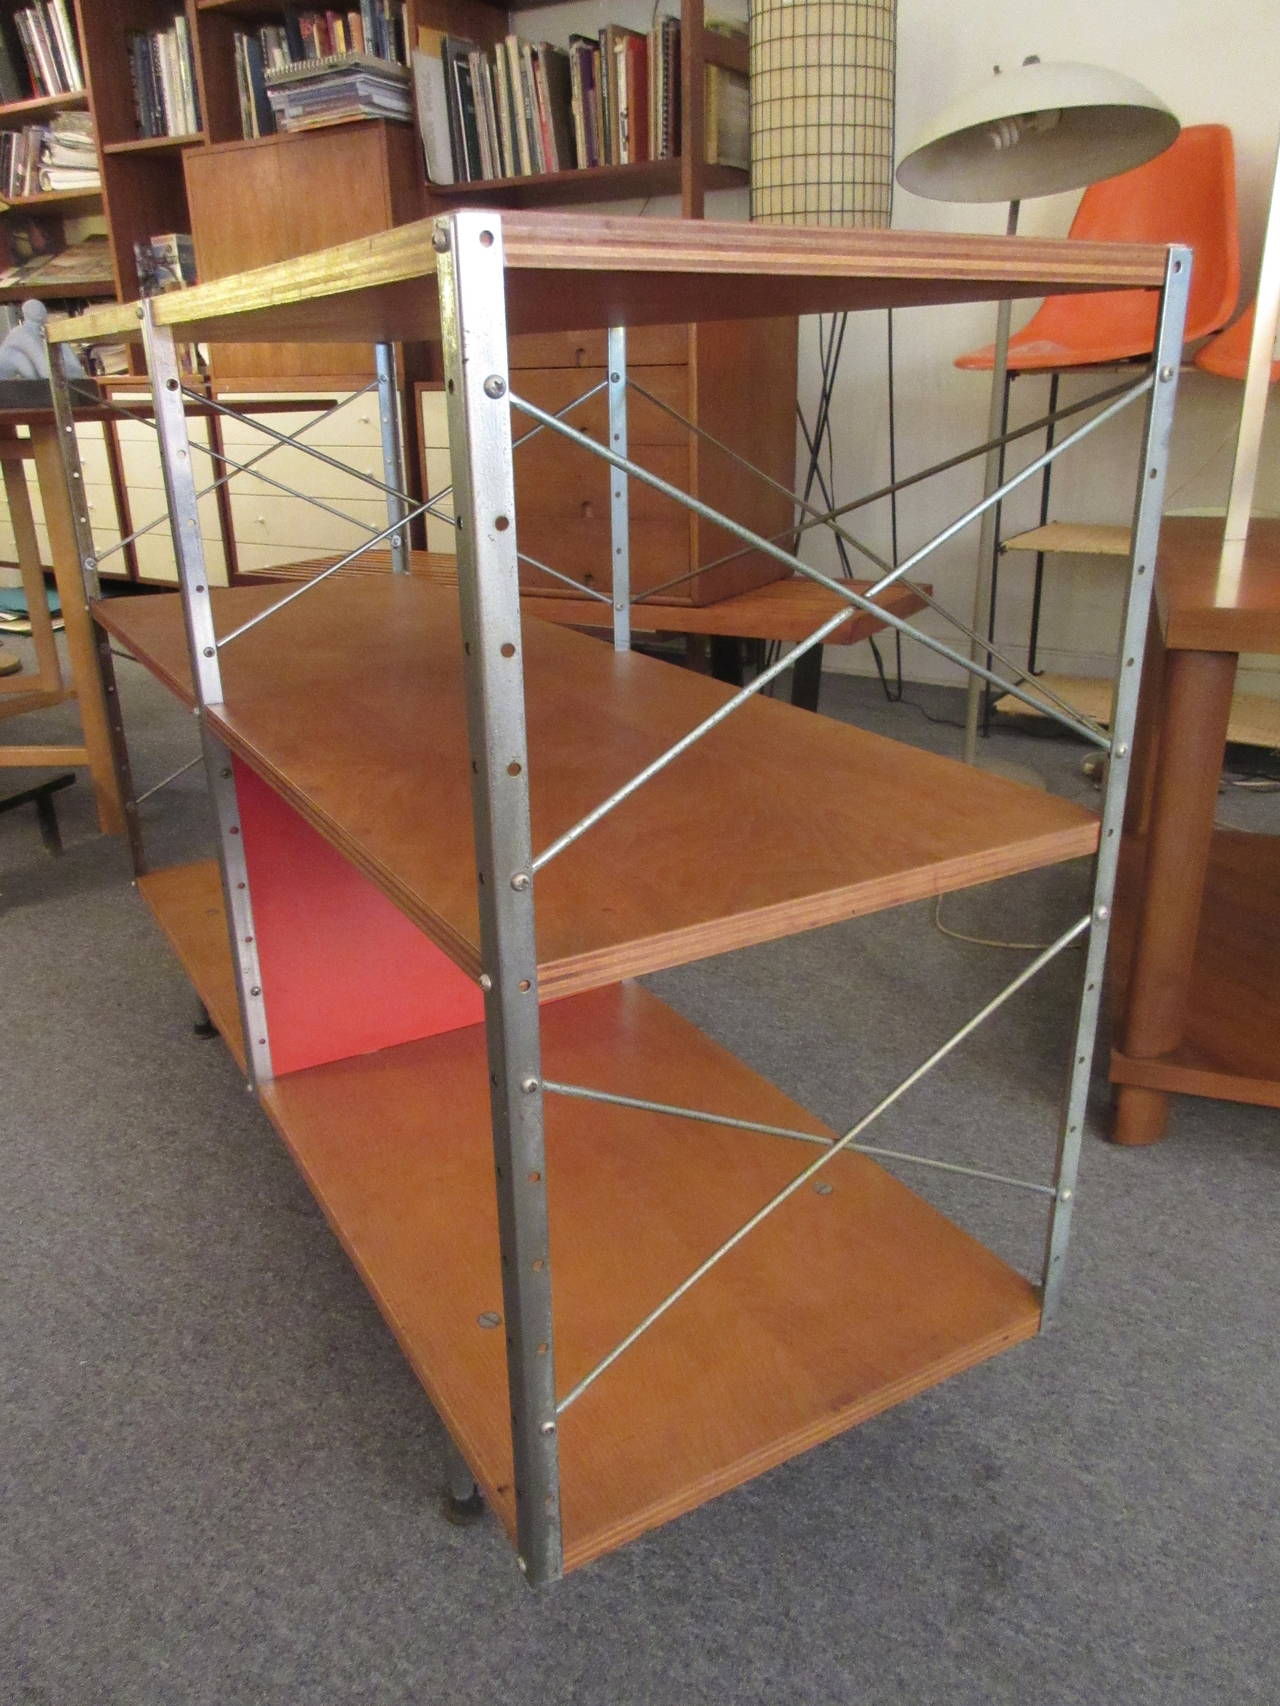 Eames 1950 design for the storage units was revised in 1952 with this more durable leg configuration. This unit retains all four original cupped feet, original wood finish, one red panel and eight X-supports.